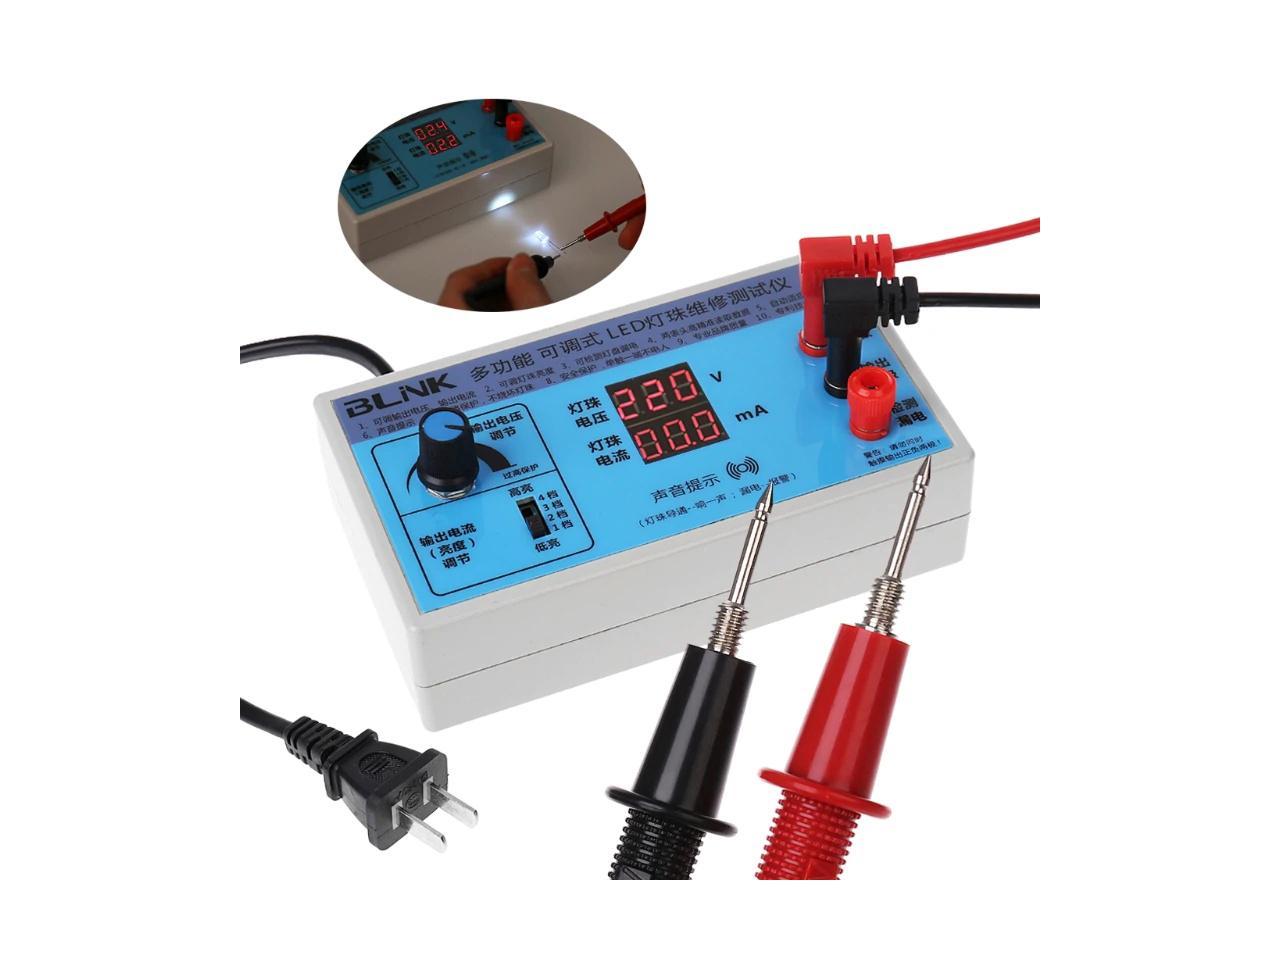 Details about  / Electric LED Backlight Tester Box Lamp Beads Bulb Power Meter 90~265V Input H3E8